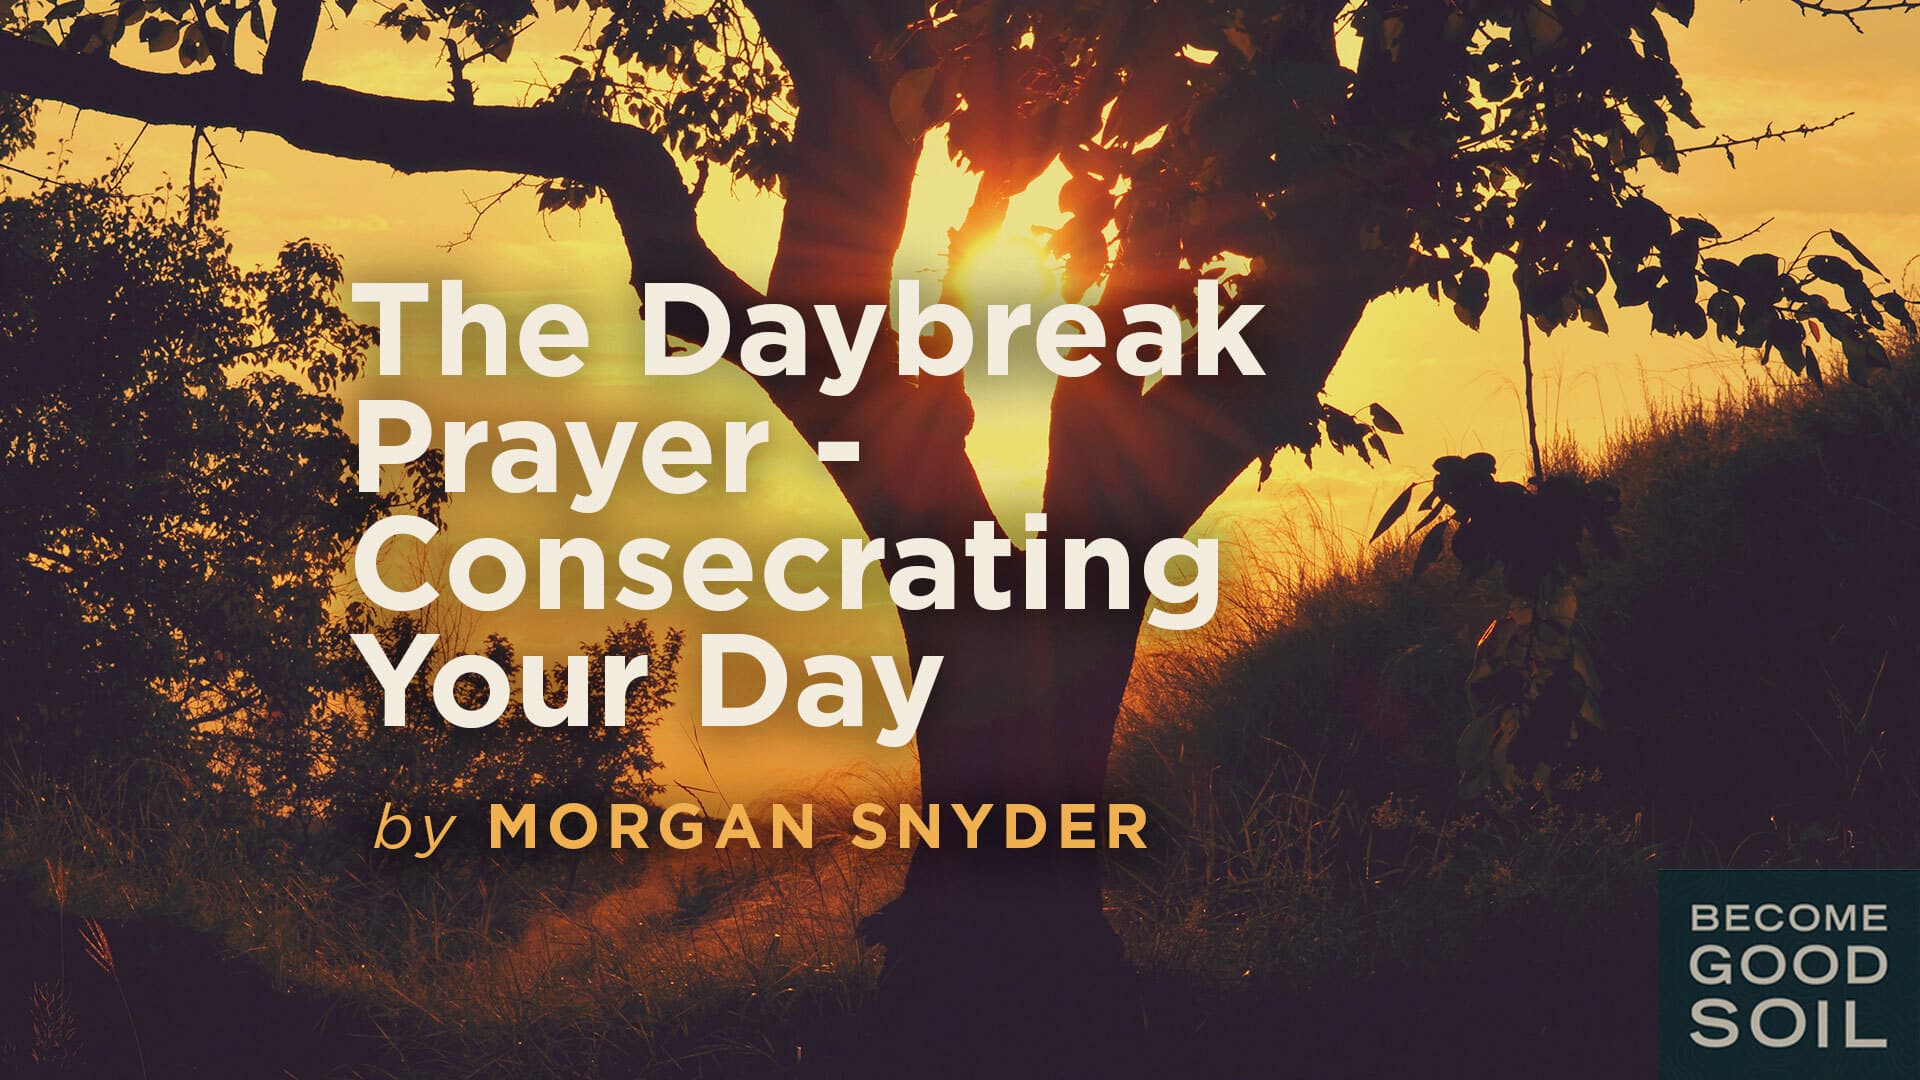 The Daybreak Prayer - Consecrating Your Day